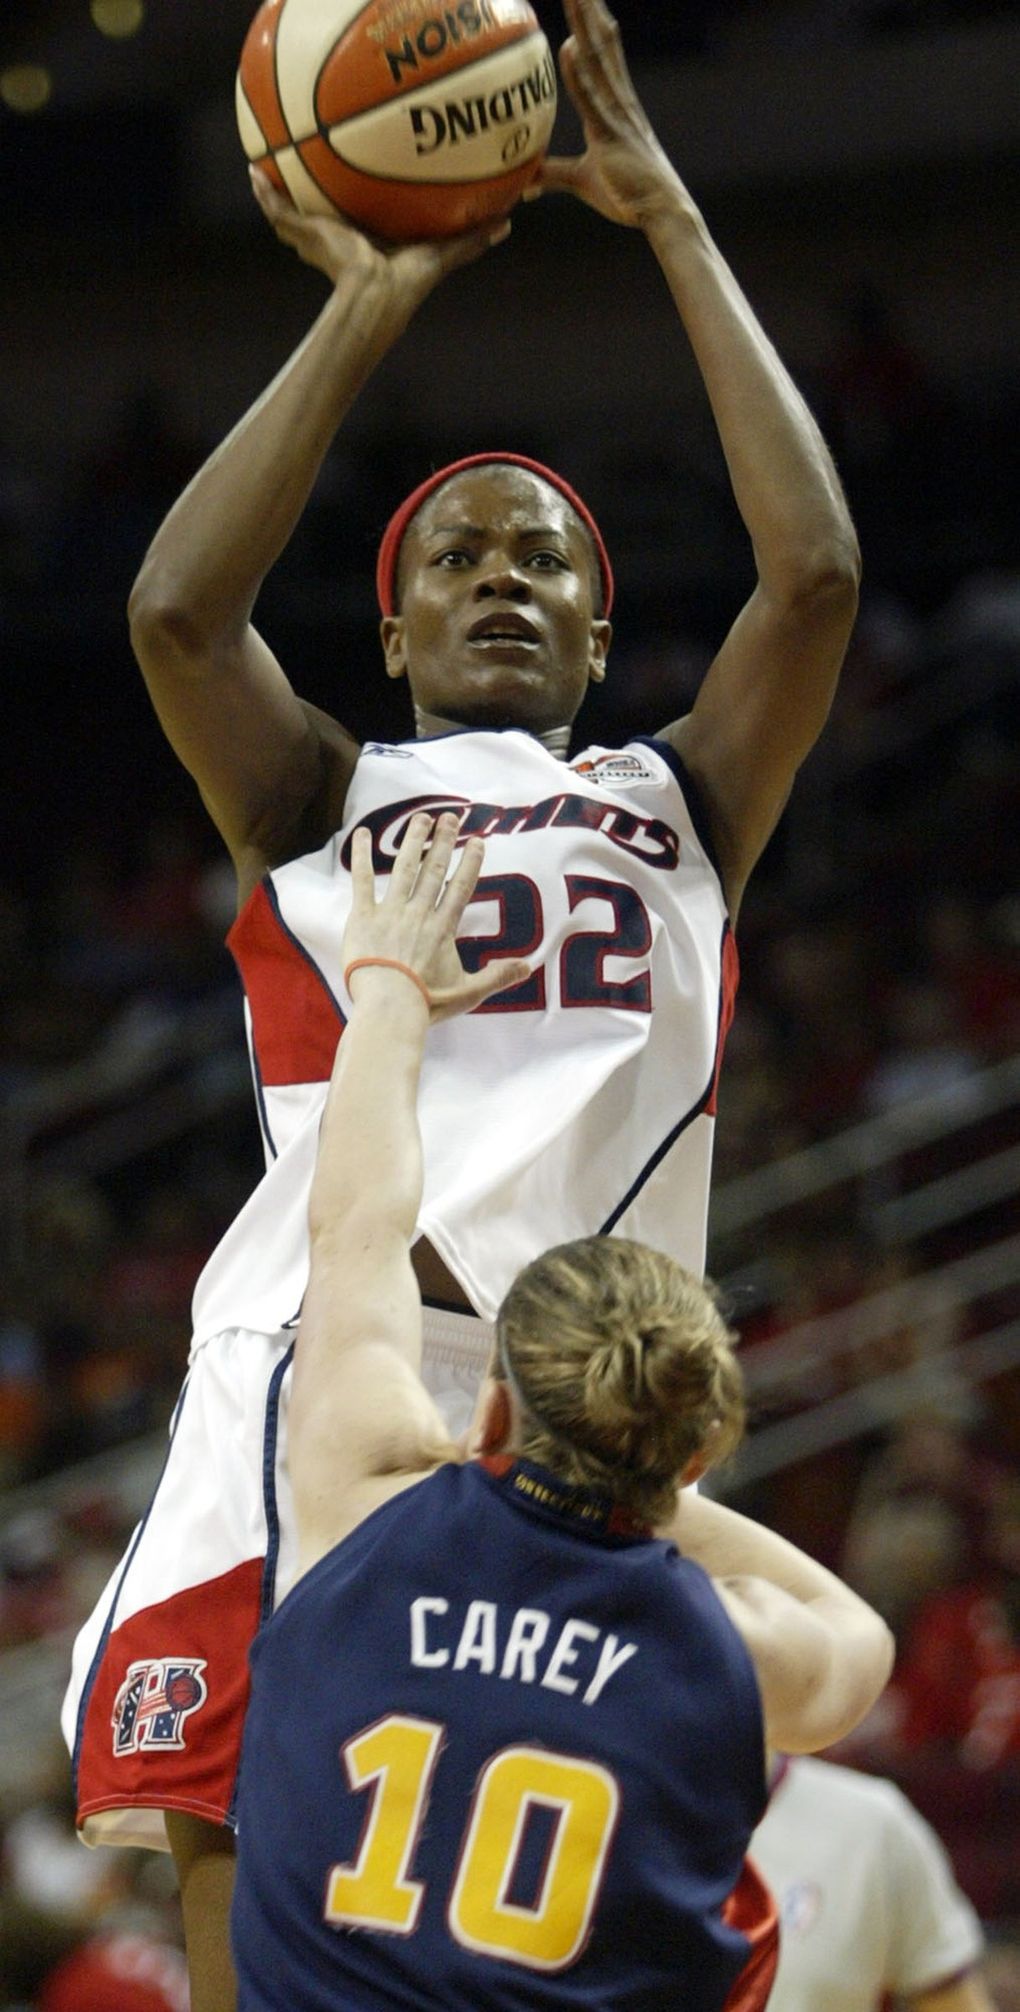 Houston Comets’ Sheryl Swoopes (22) shoots over Connecticut Sun’s Jamie Carey (10) defends during the first half of a WNBA basketball game on Sunday, Aug. 6, 2006, in Houston. (JESSICA KOURKOUNIS / AP)